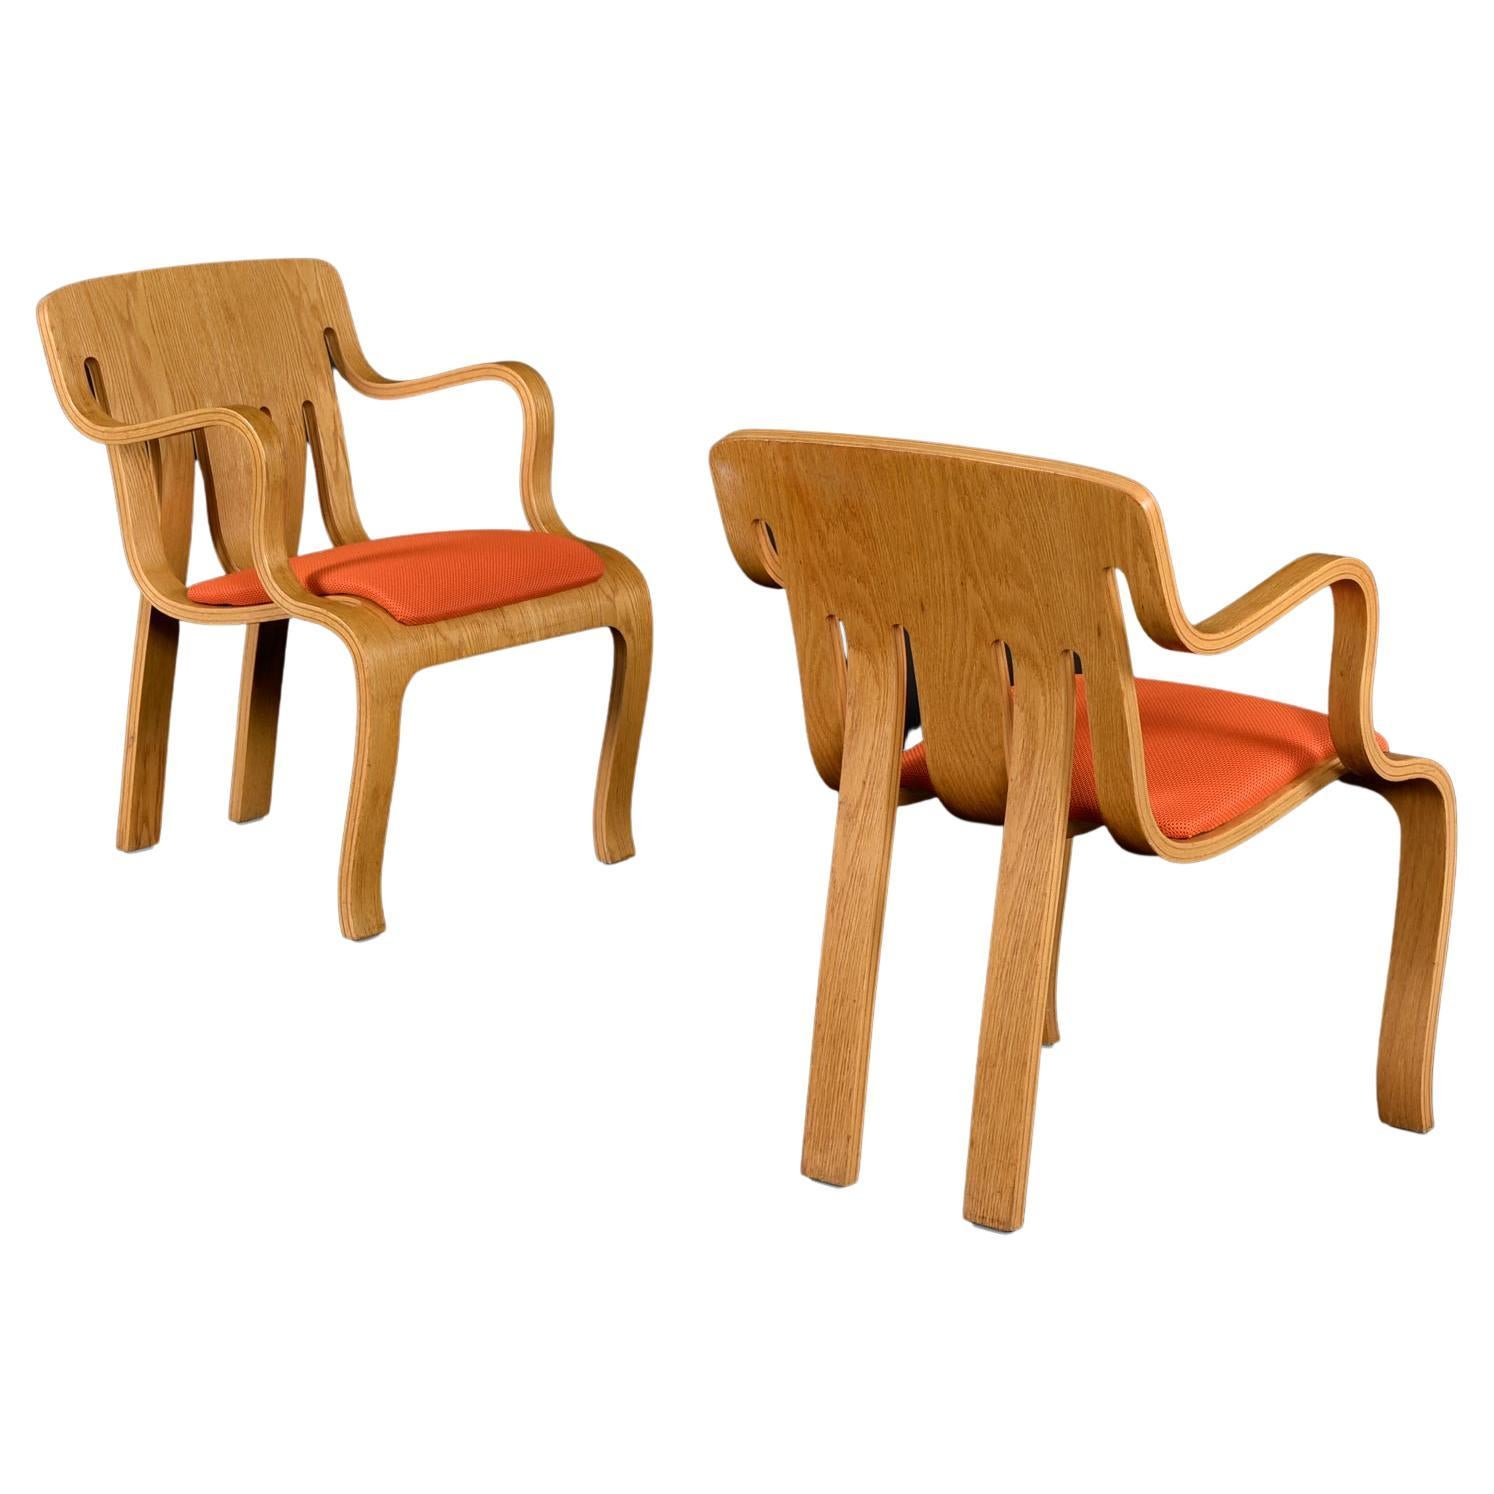 Chairs listed and sold as a set of (2)

It is truly no surprise that this same chair is in the permanent collection at The Smithsonian American Art Museum. Meditate on the genius involved in crafting each chair from a single sheet of layered ply.